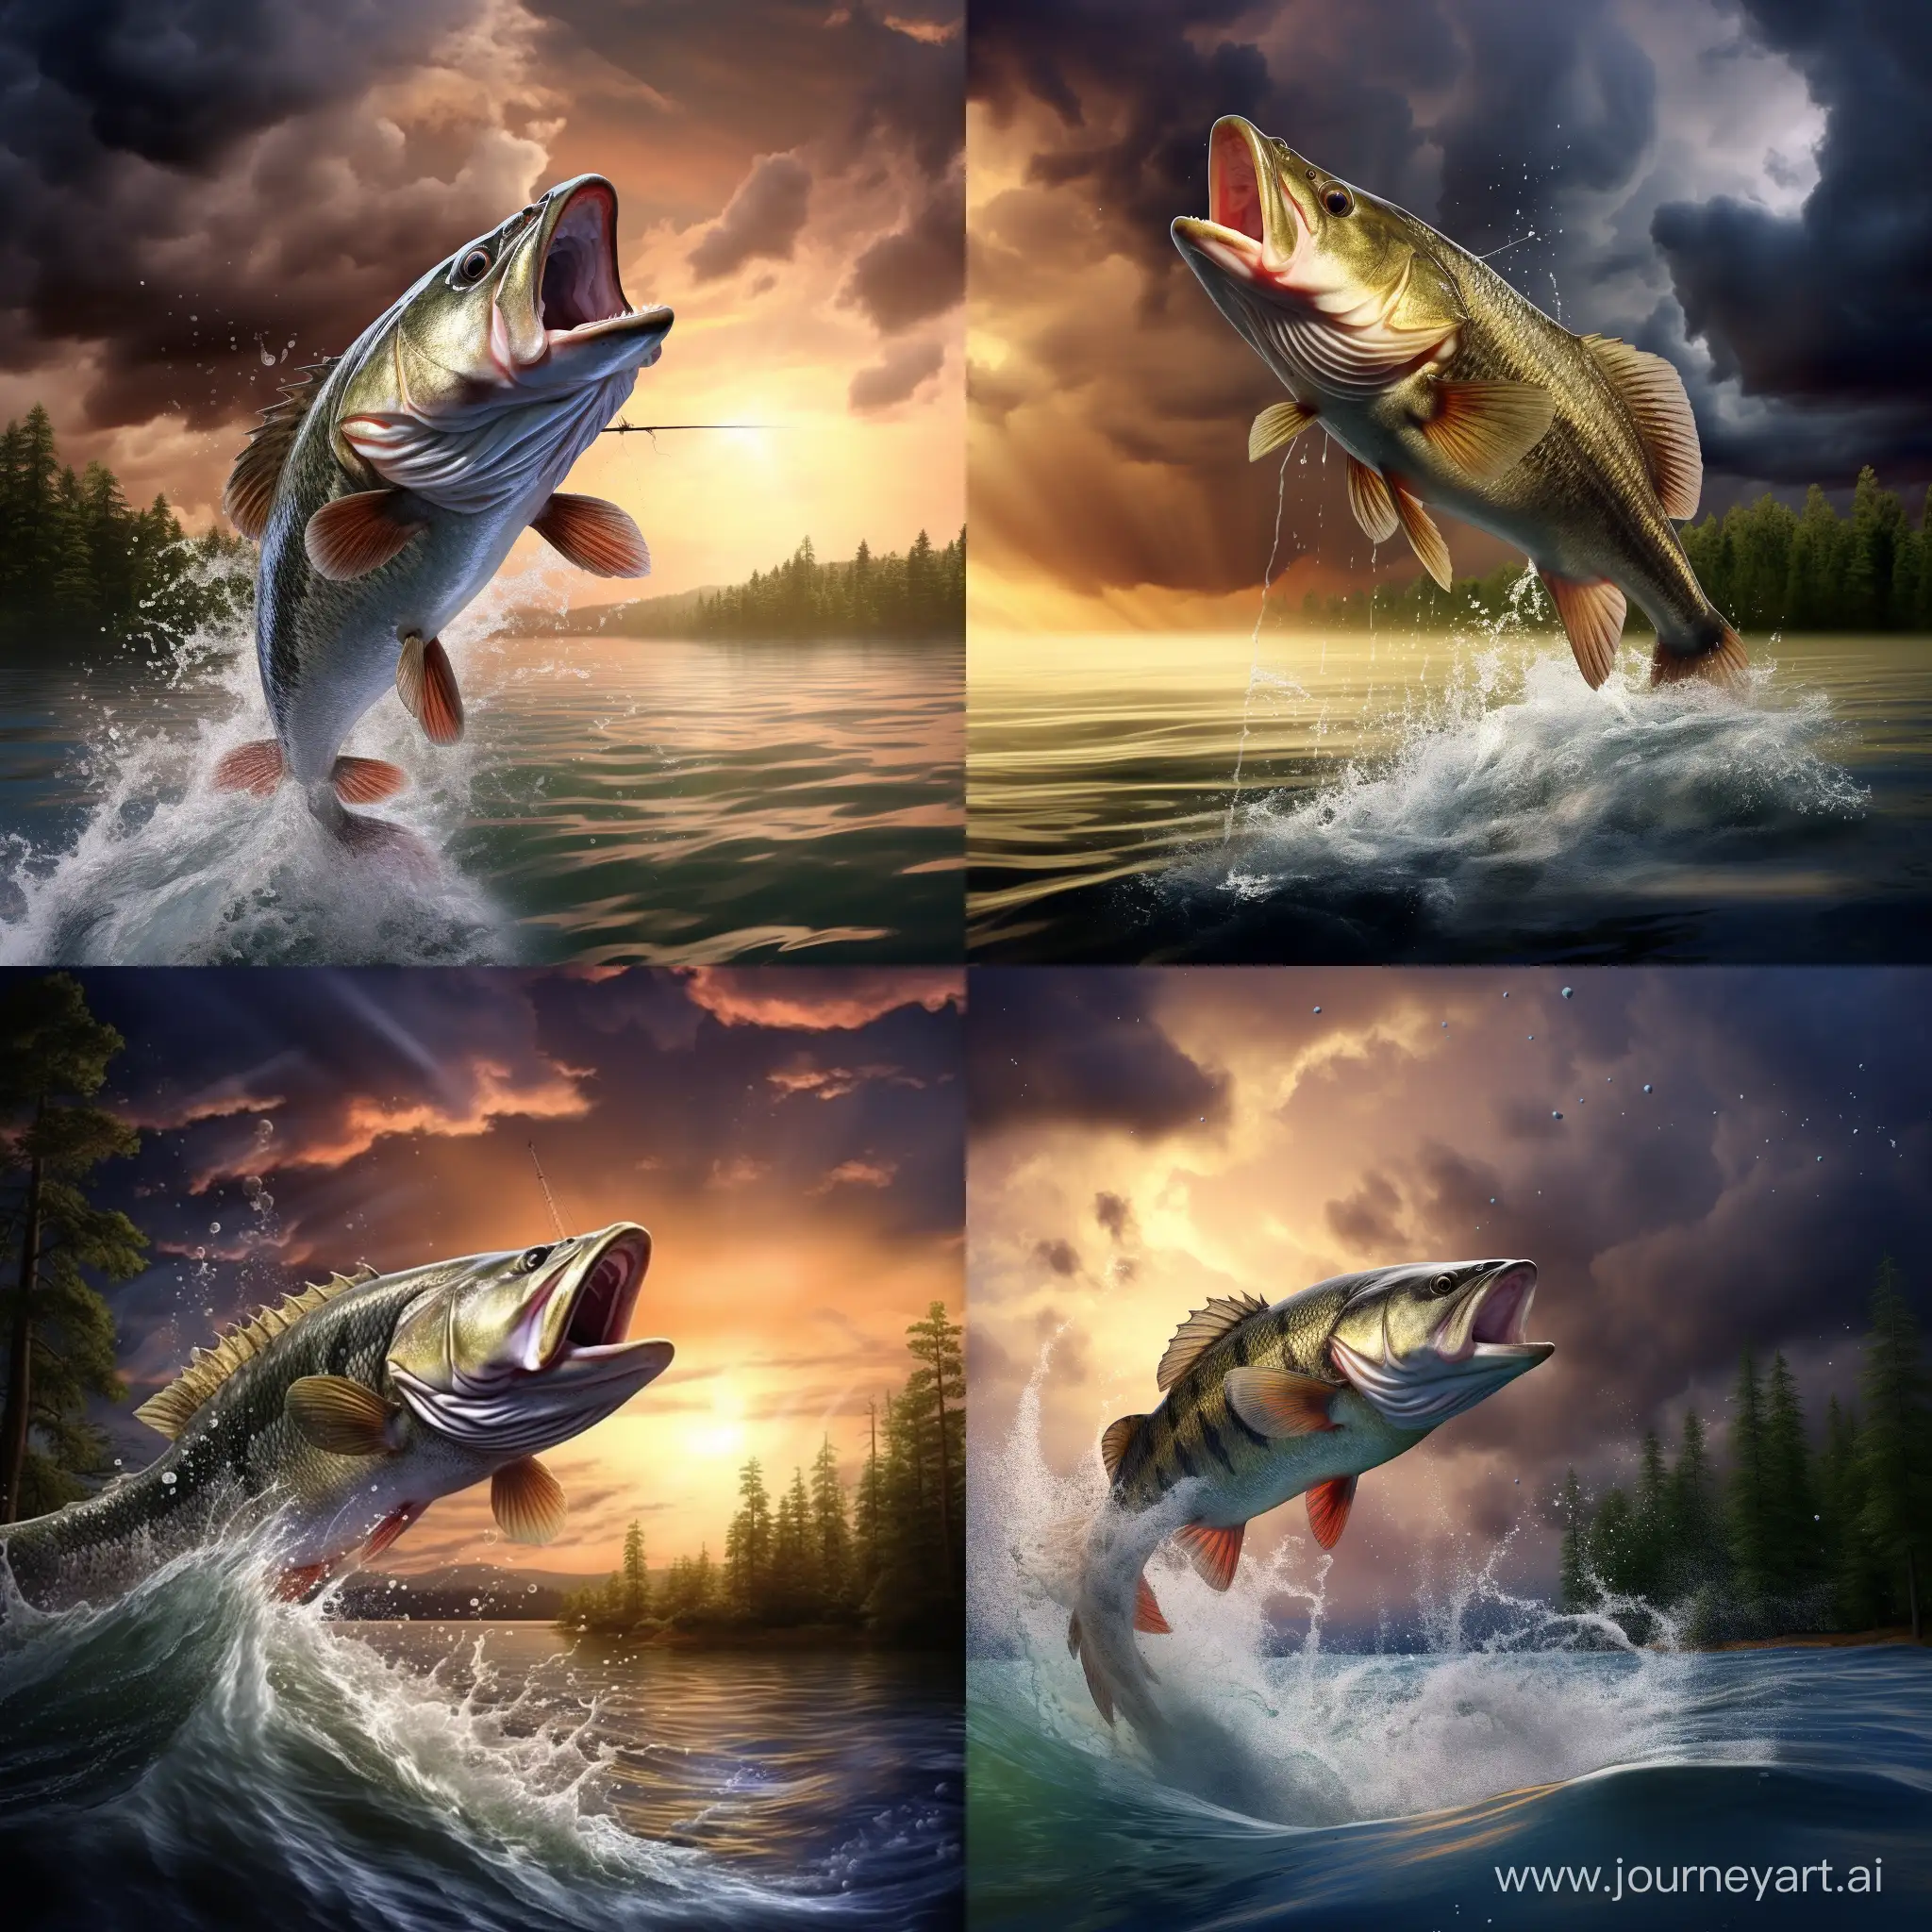 "Throwing a bass fishing lure from its mouth." A largemouth bass fish, is jumping out of a lake, an Extreme splash of water from the thrashing movement of the largemouth bass fish. The background is a beautiful sky with lightning flashes, over a lake in the woods. photo realistic quality